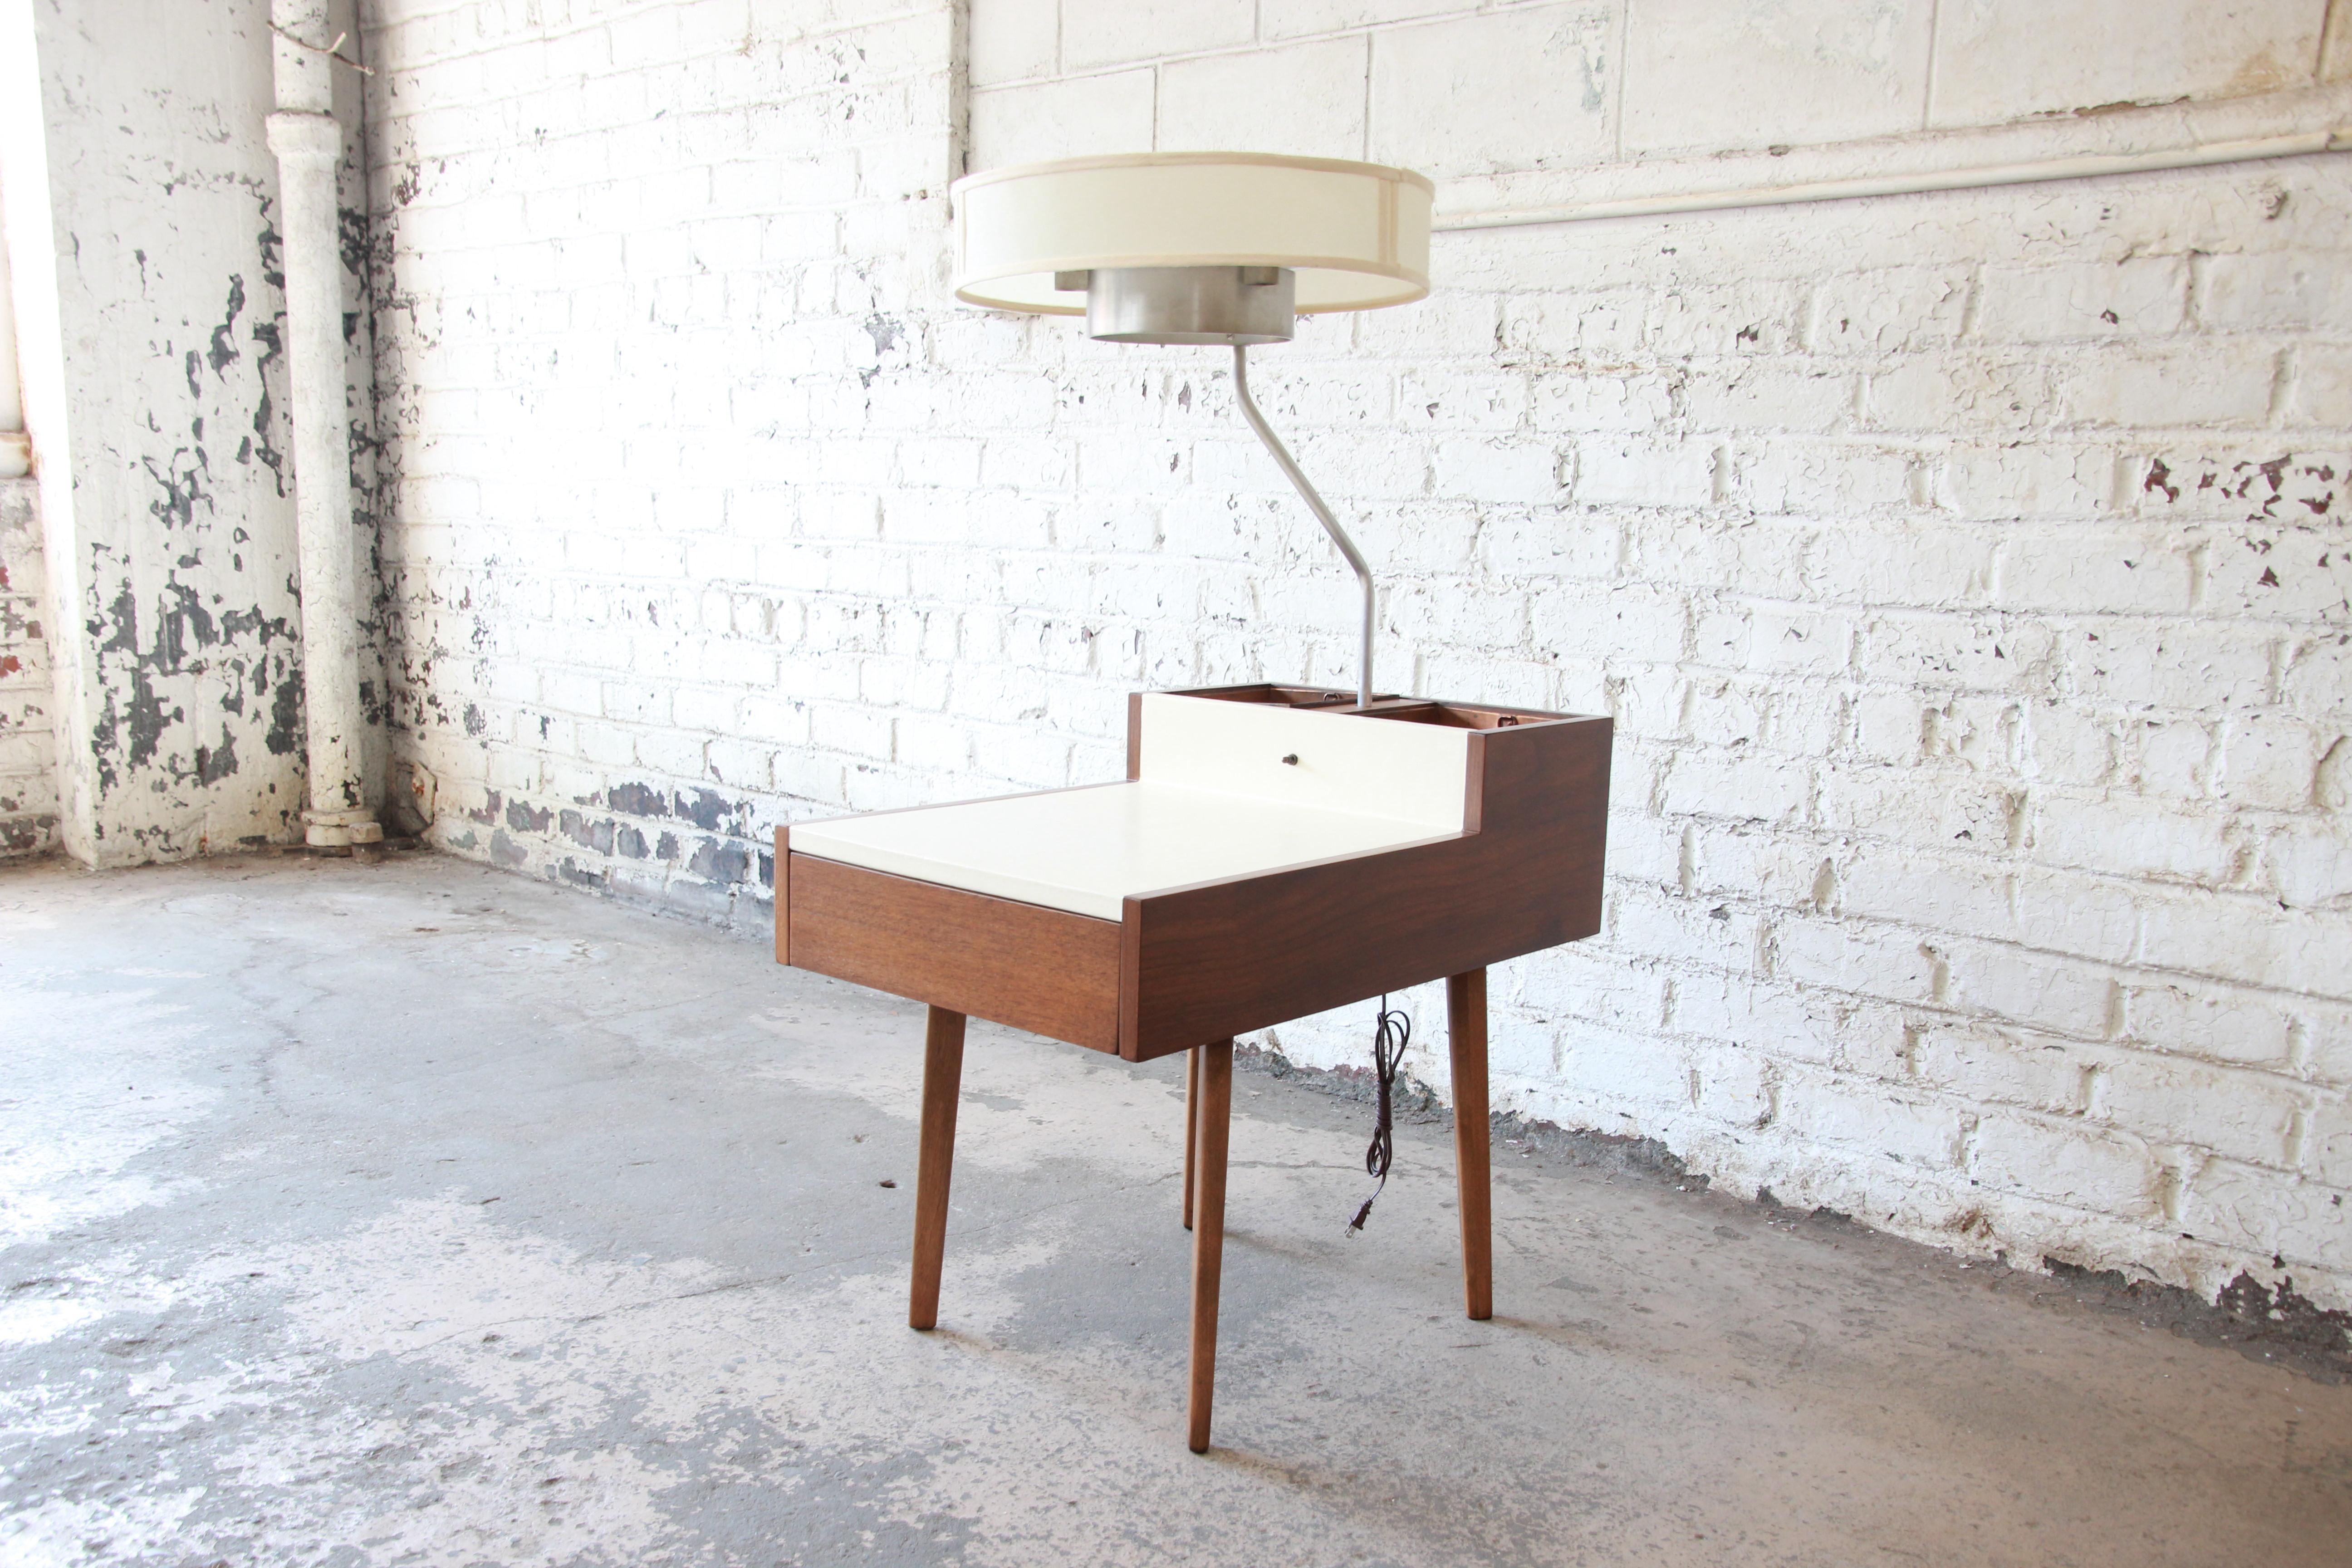 A rare and exceptional Mid-Century Modern lamp table designed by George Nelson for Herman Miller. The table features a white leather tabletop and a gorgeous walnut case that rests on four tapered and splayed walnut legs. There is a single divided